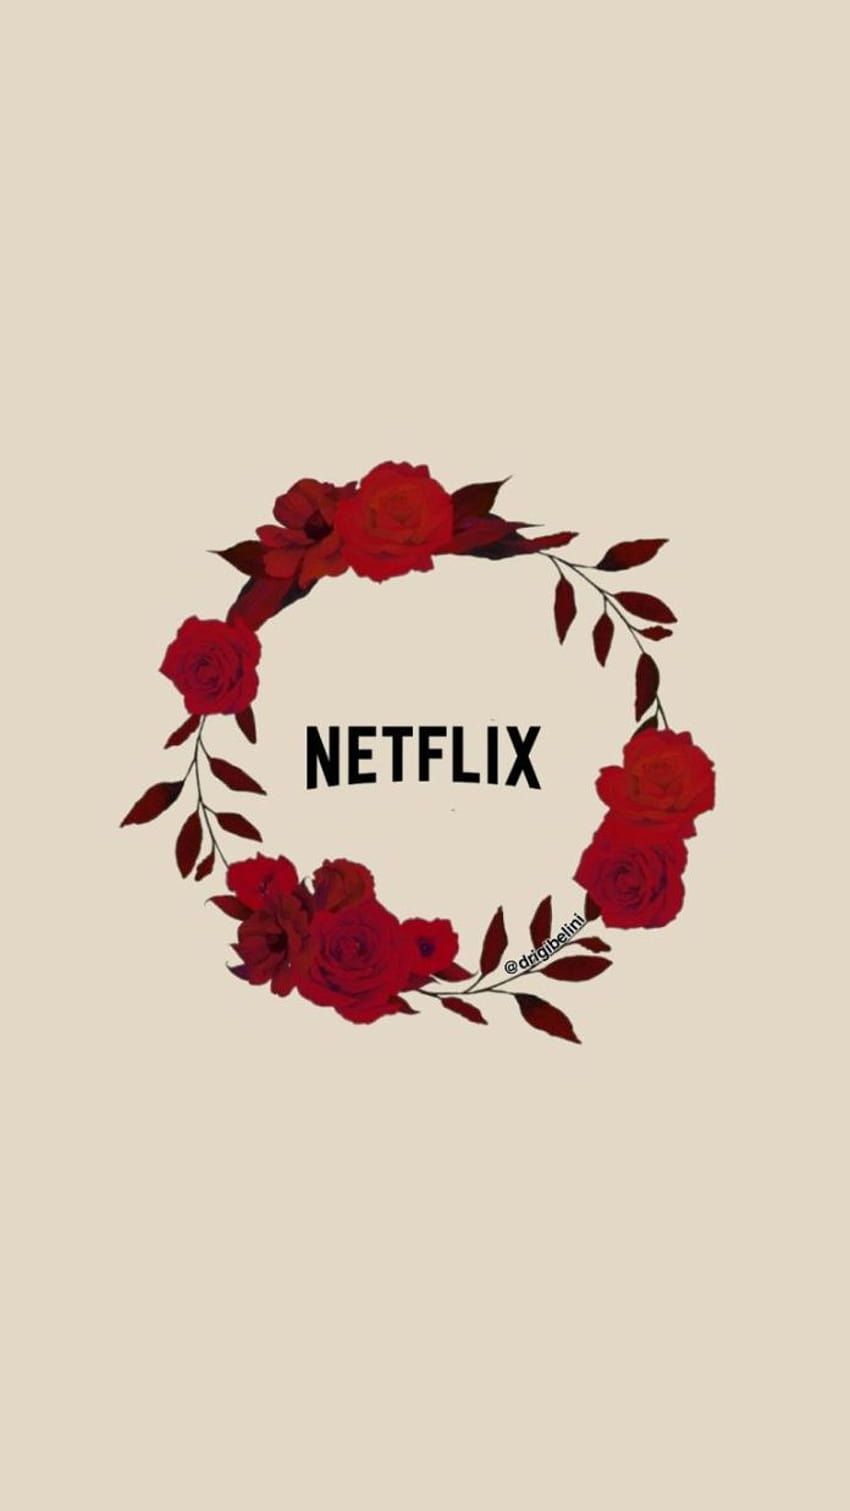 The netflix logo with red roses - Netflix